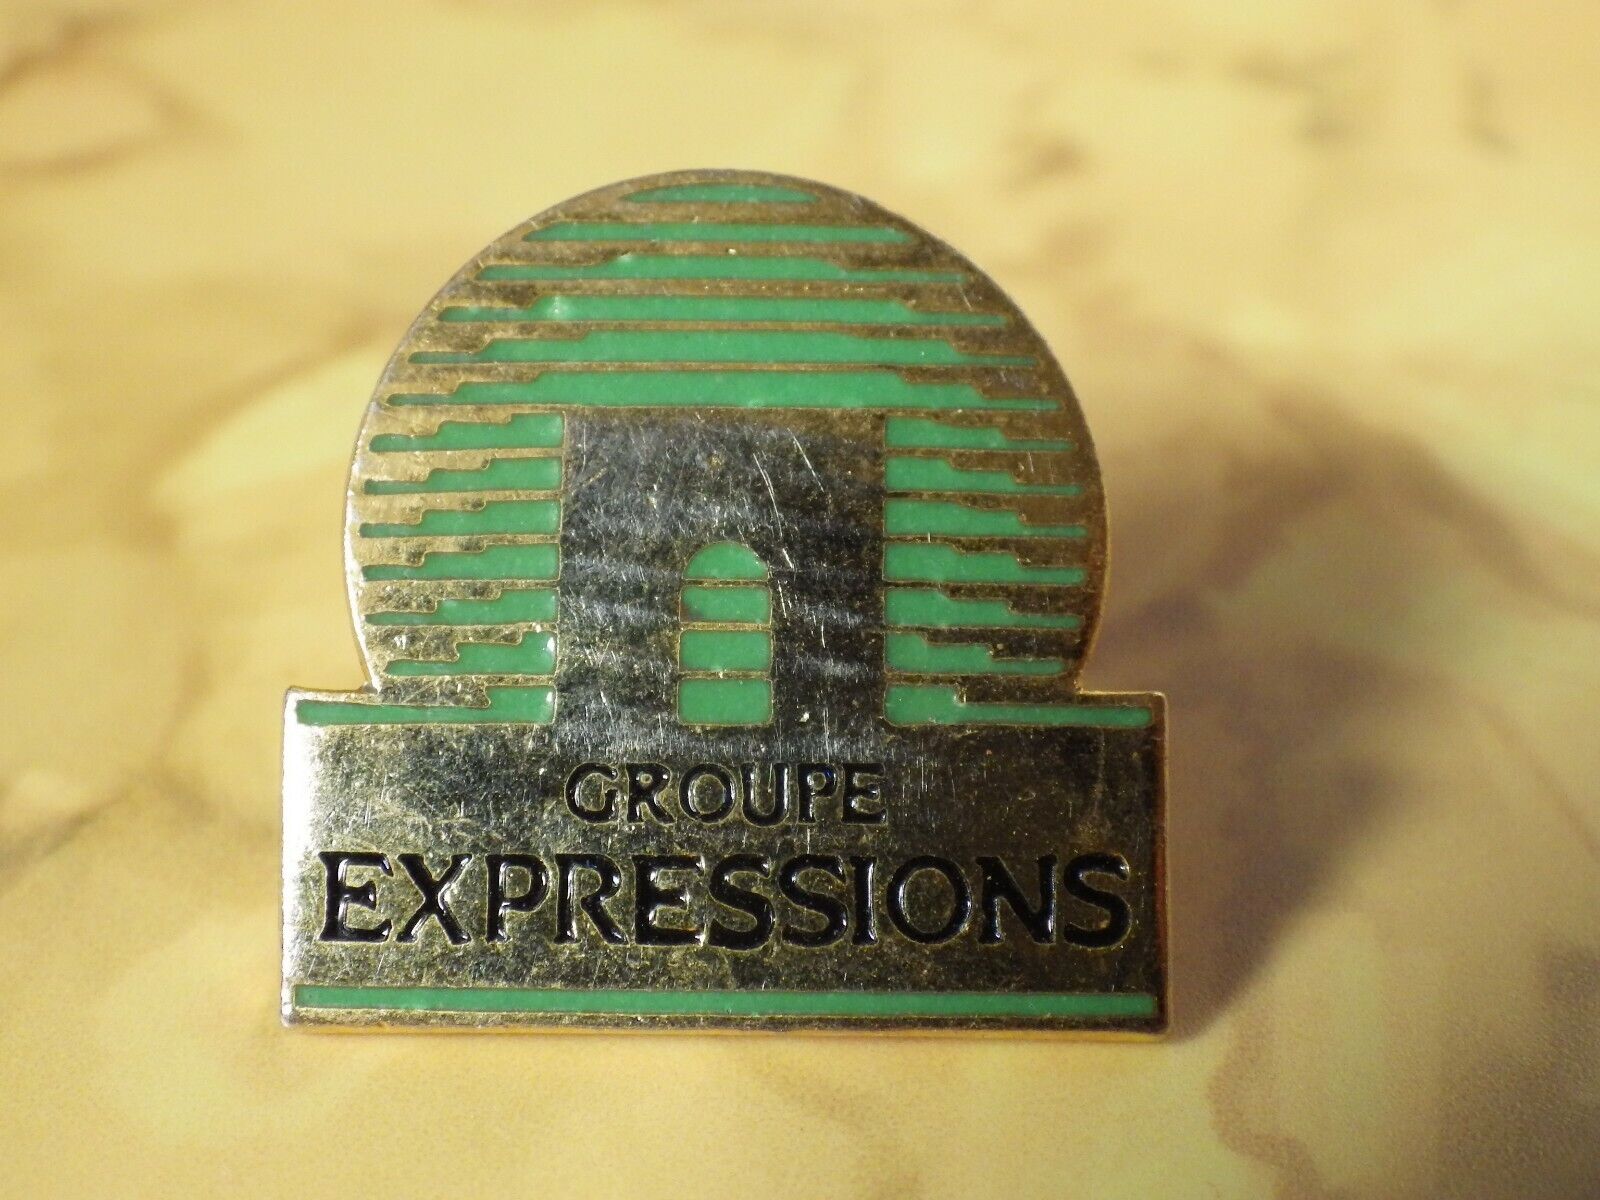 Pin\'s Vintage Lapel Collector Pins Advertising Group Expression Lot C017